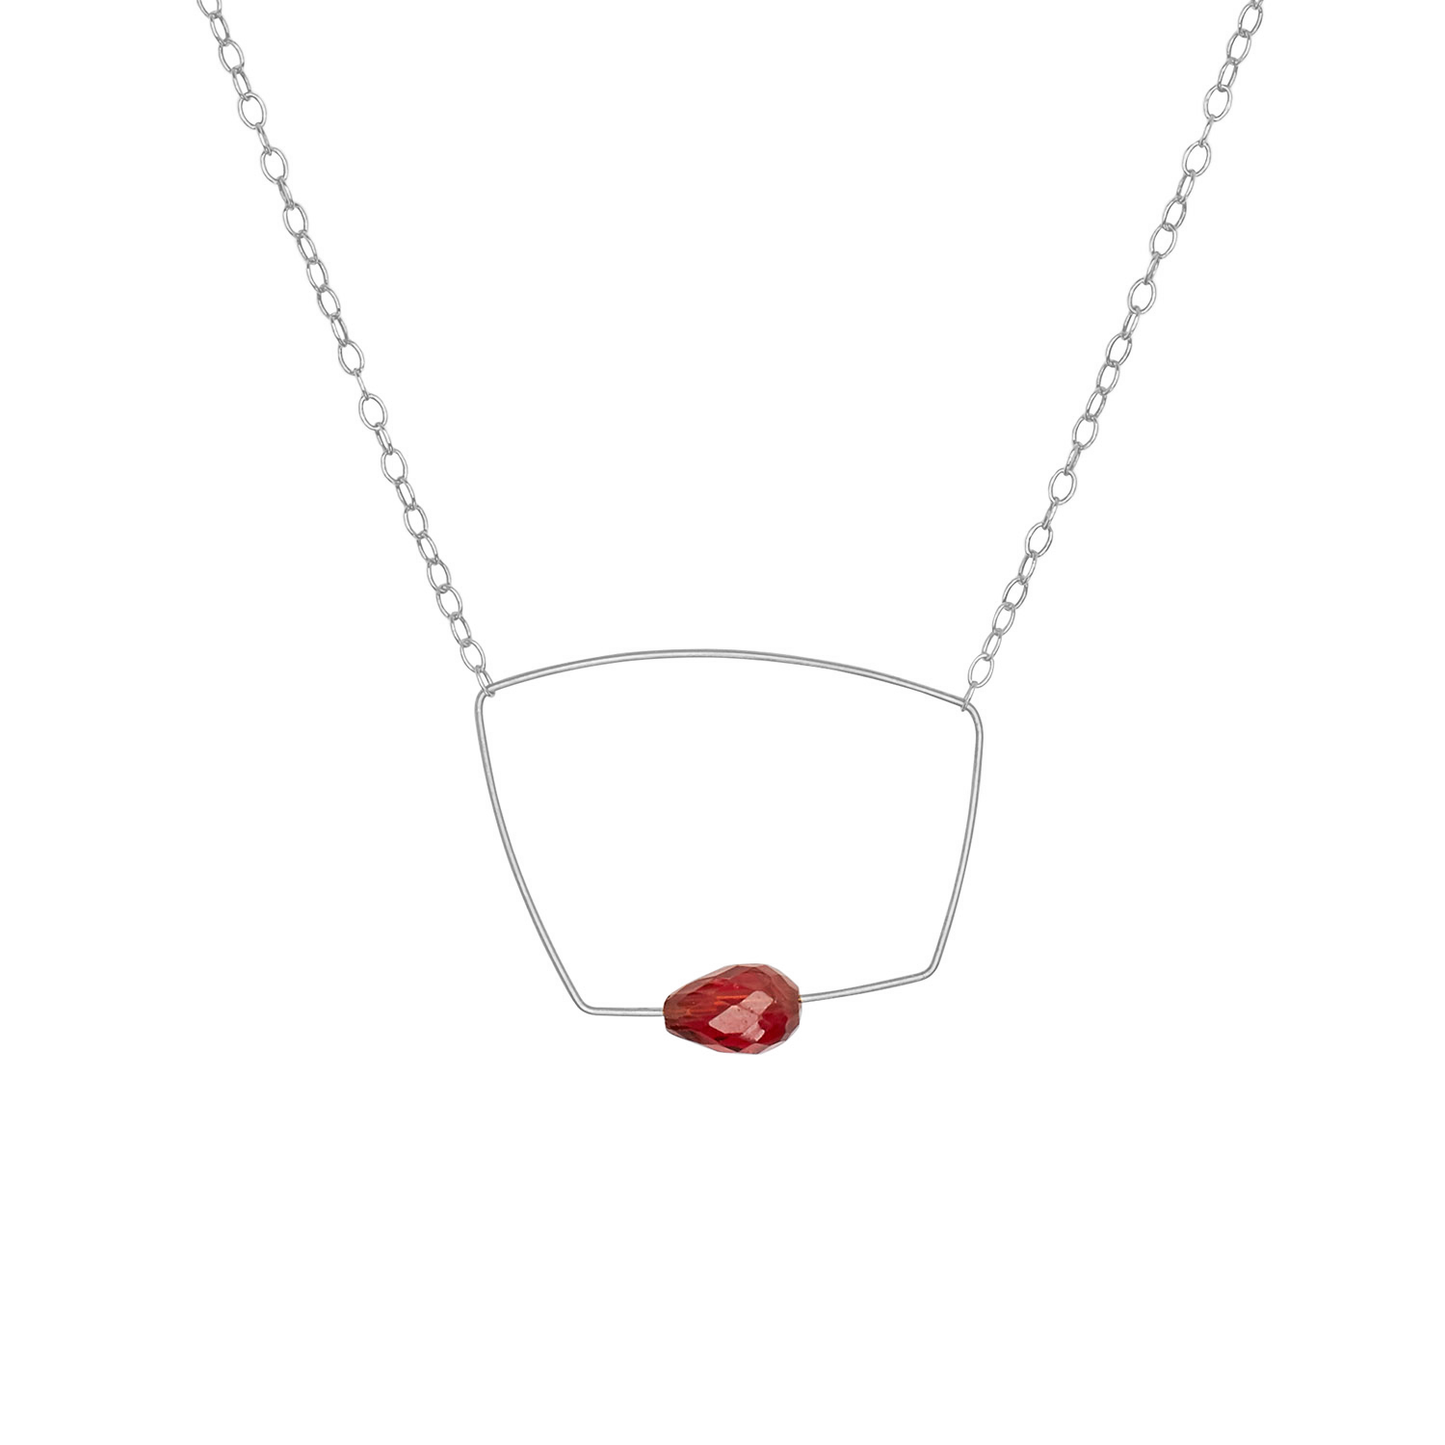 Asymmetric Square Pendant Necklace with hand-cut Gemstones